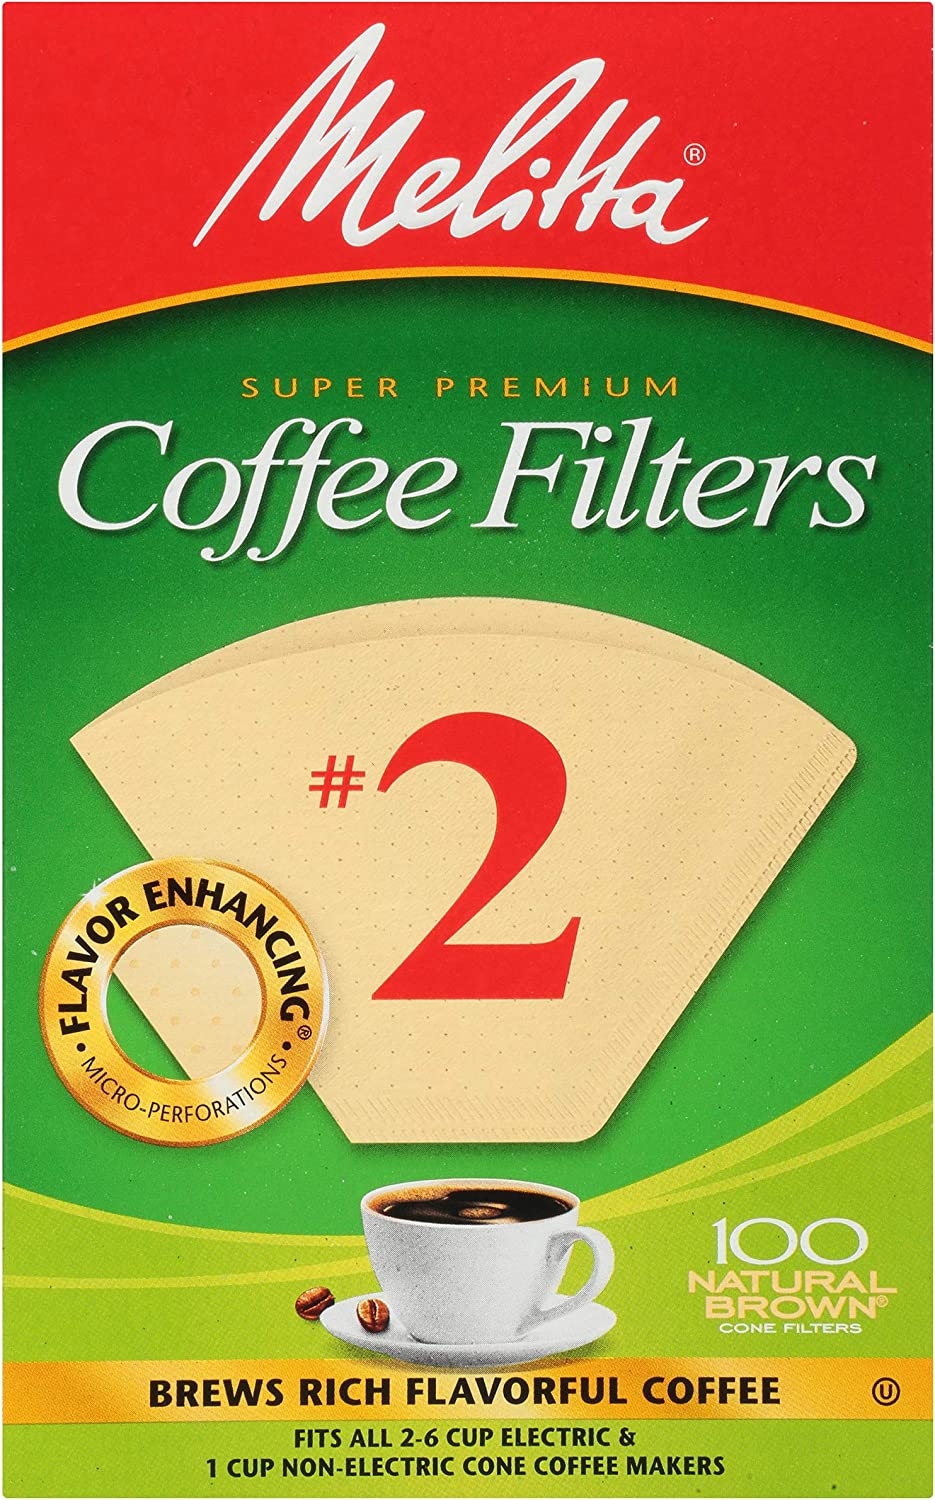 Melitta 2 Cone Coffee Filters, Natural Brown, 100 Count (Pack of 6) 600 Total Filters Import To Shop ×Product customization